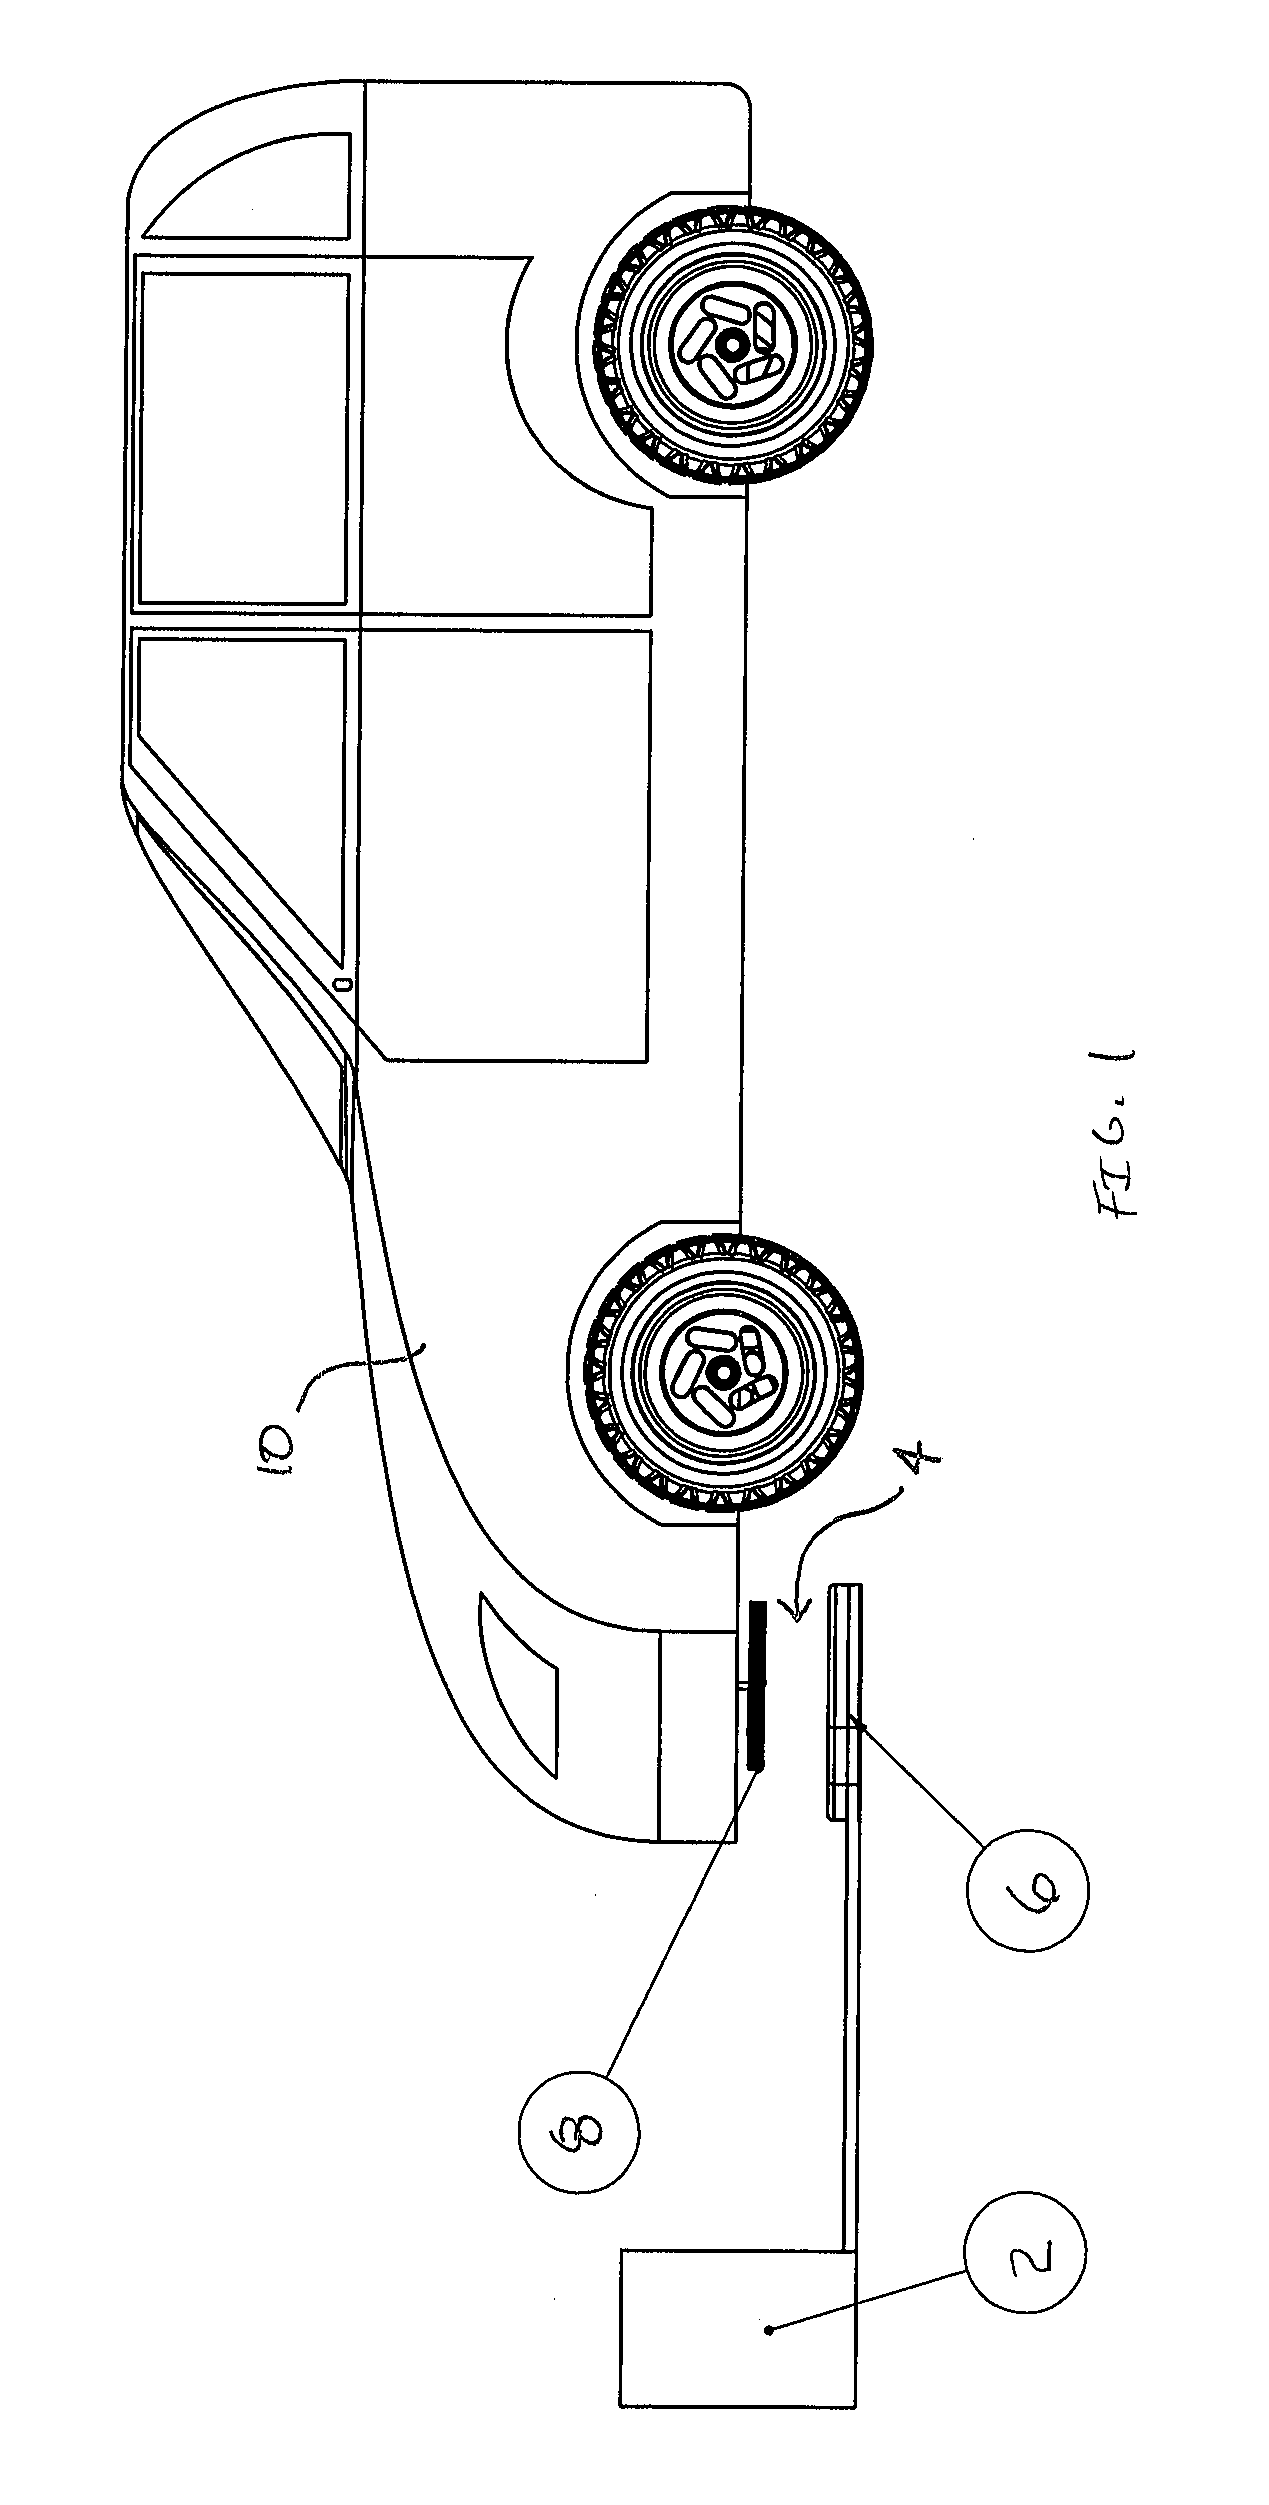 Secondary coil structure of inductive charging system for electric vehicles